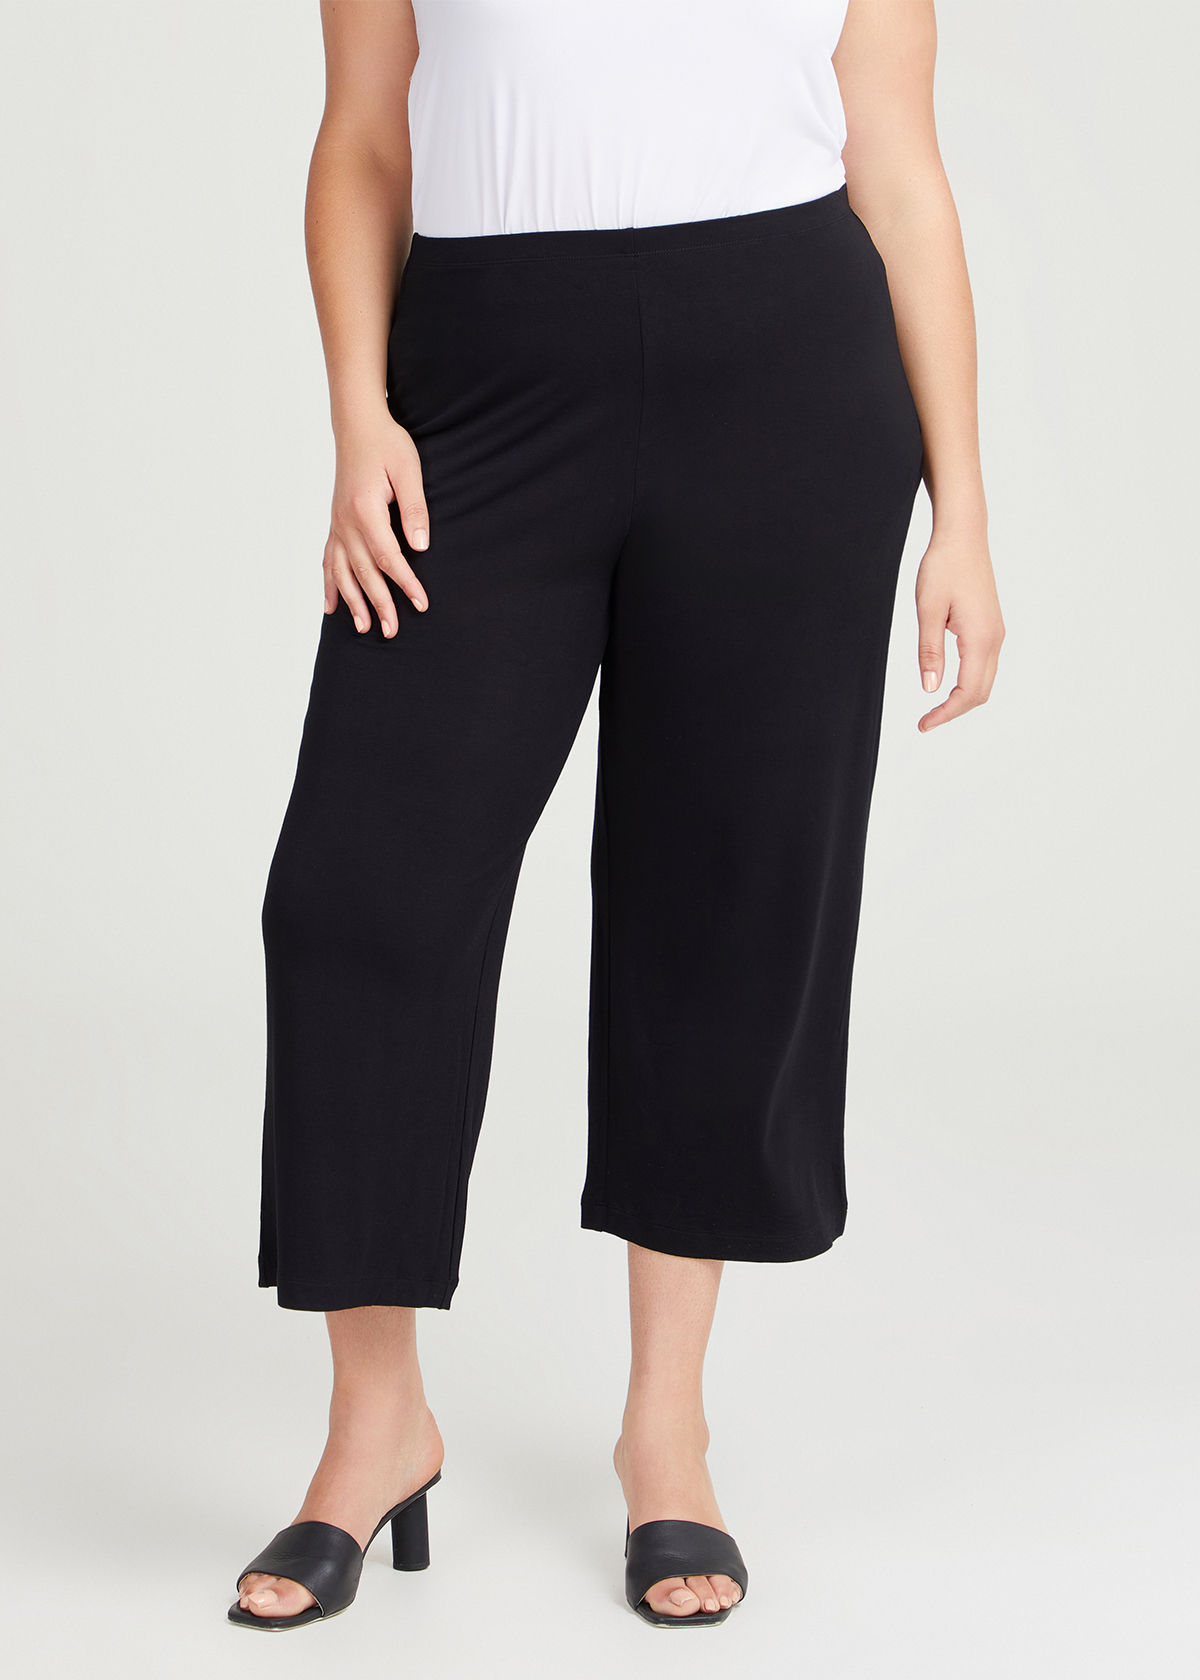 Shop Plus Size Bamboo Culotte Pant in Black | Sizes 12-30 | Taking Shape NZ